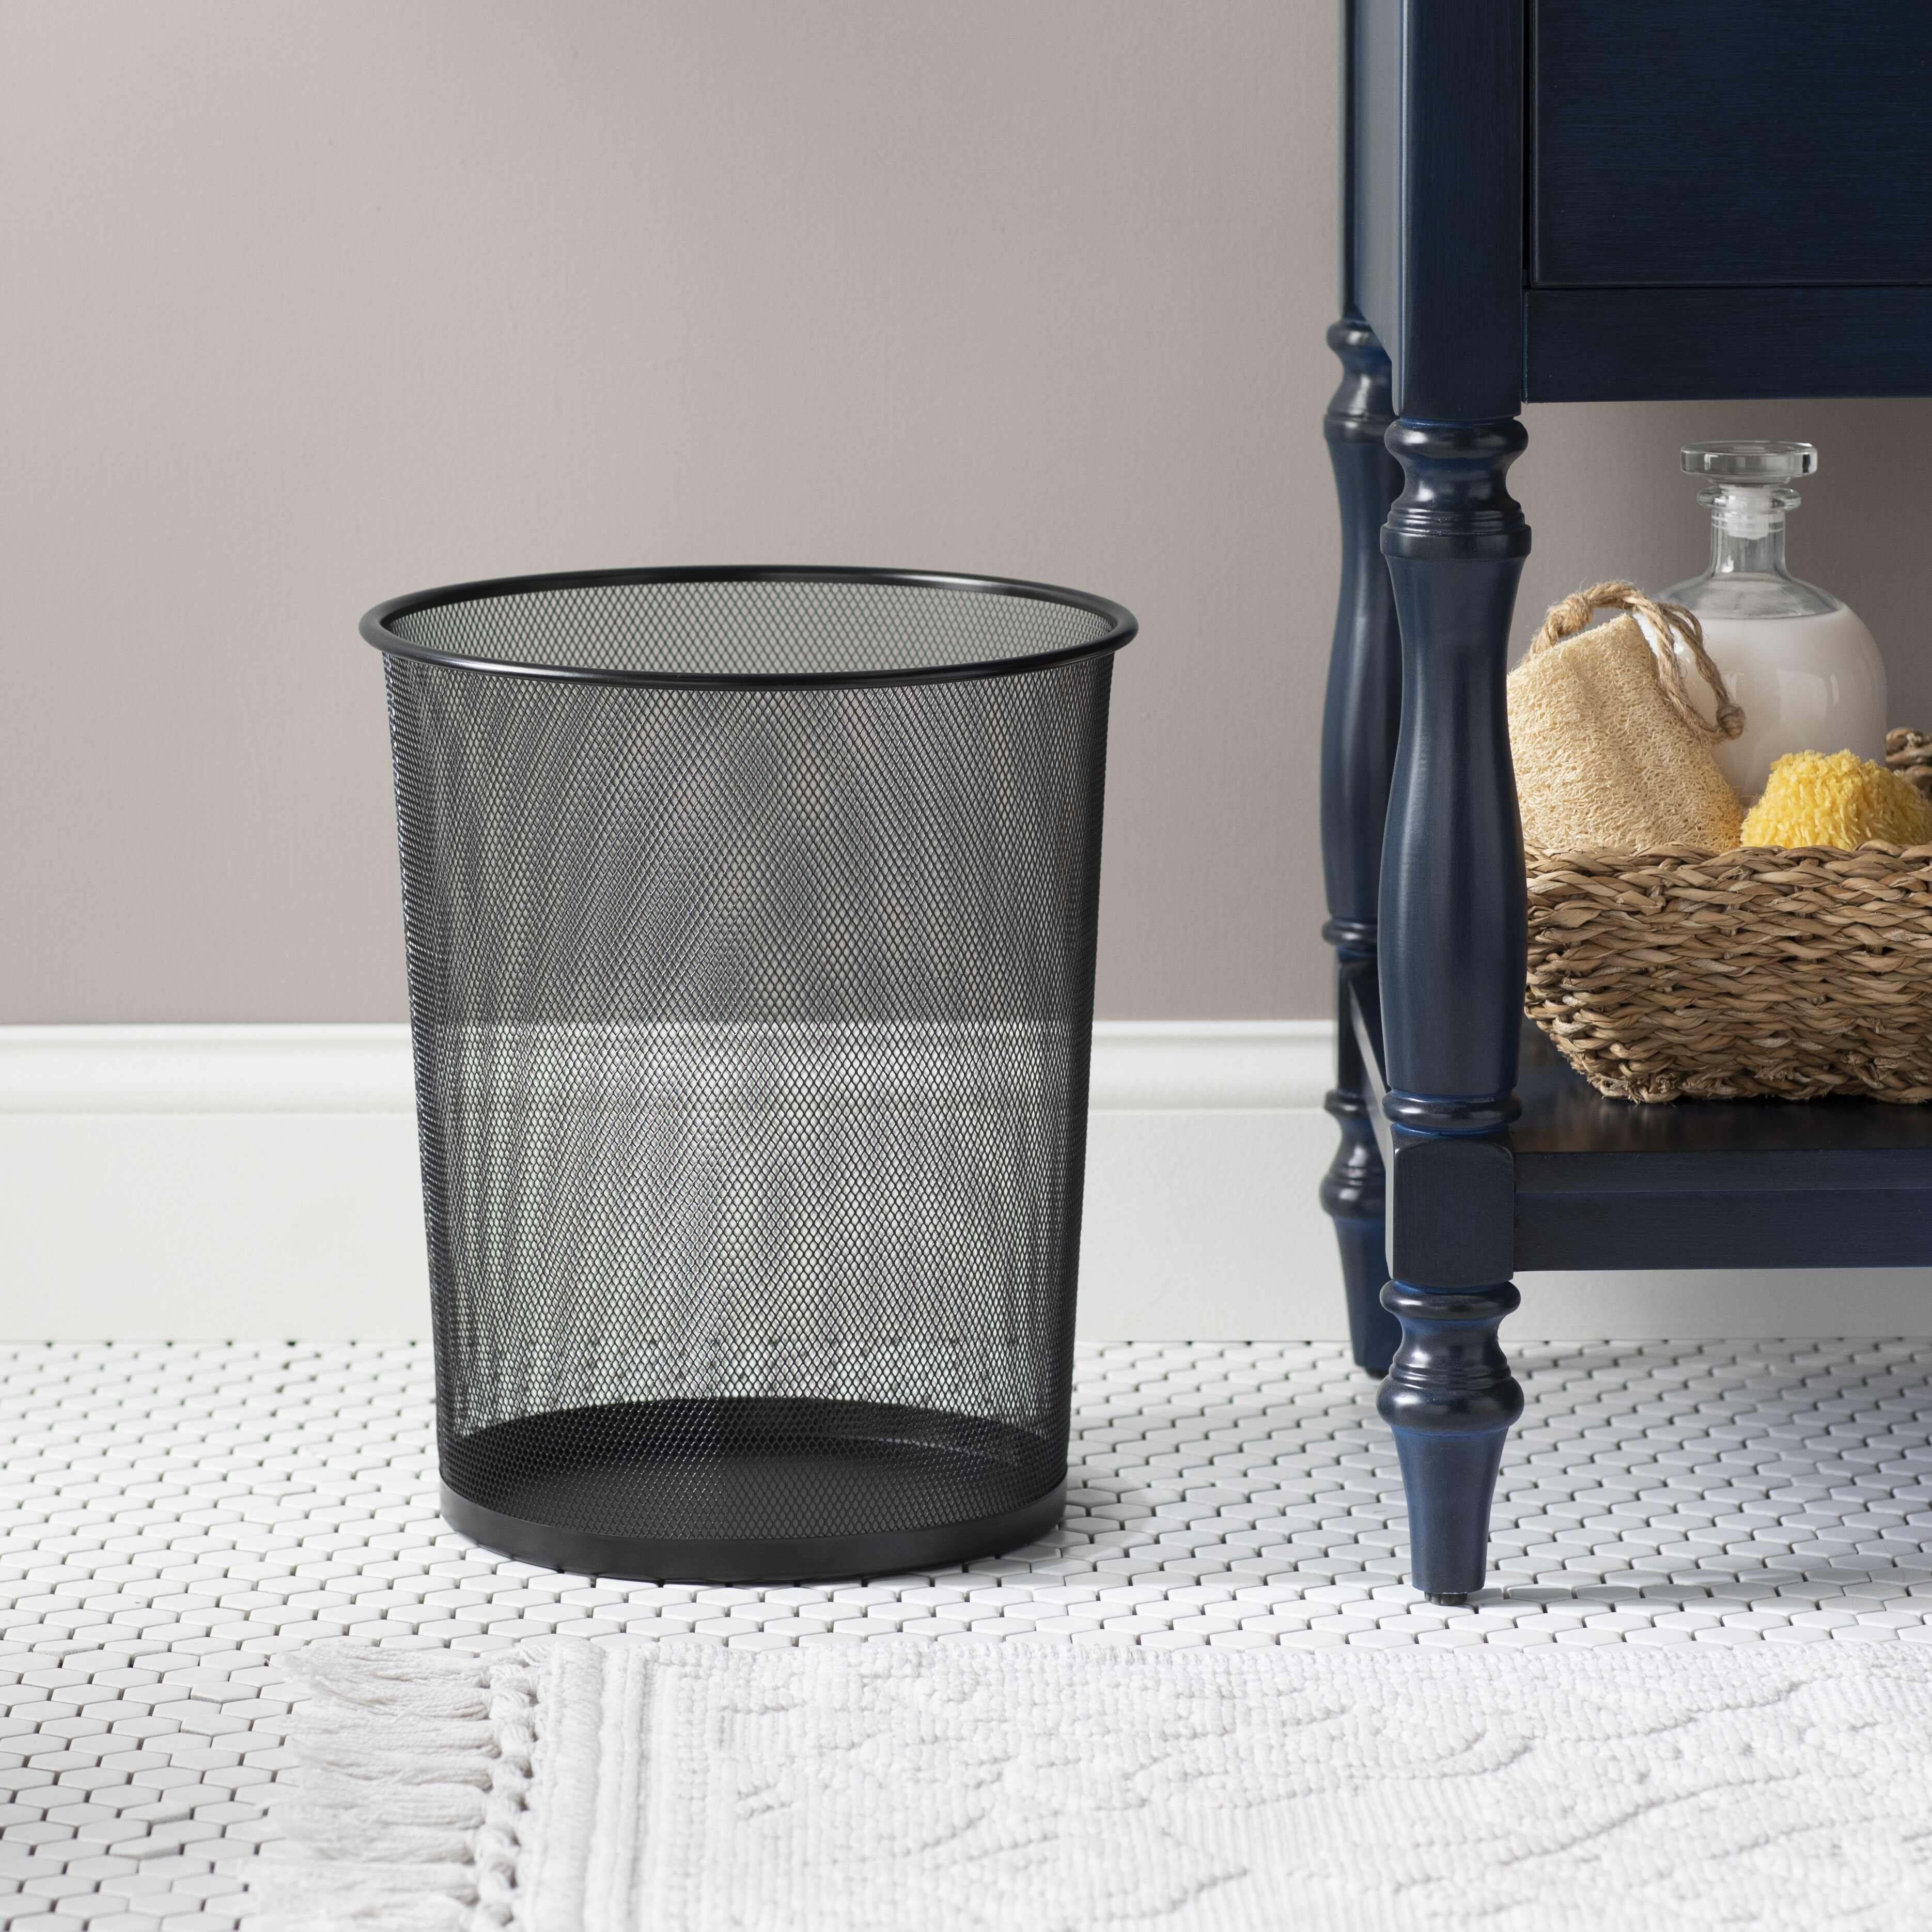 Laundry Kitchens Garages Home Offices Craft Utility Rooms Camel Brown mDesign Small Woven Basket Trash Can Wastebasket Square Garbage Container Bin for Bathrooms 